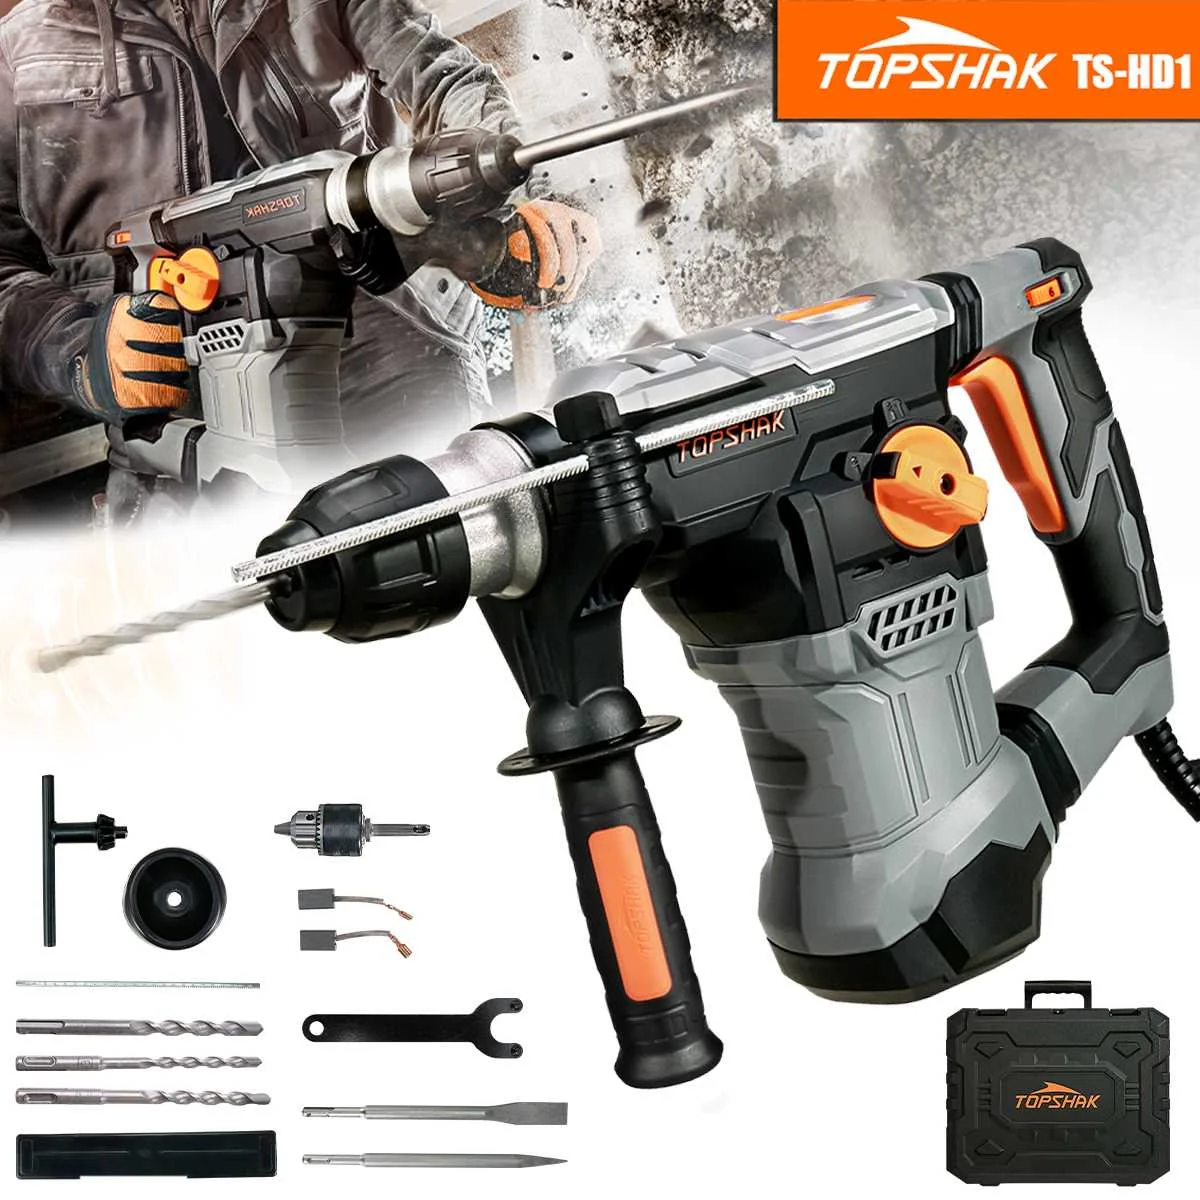 

1500W 220V Multifunctional Rotary Hammer with Accessories Drill Bit 6 Speed Electric Demolition Hammer Impact Drill